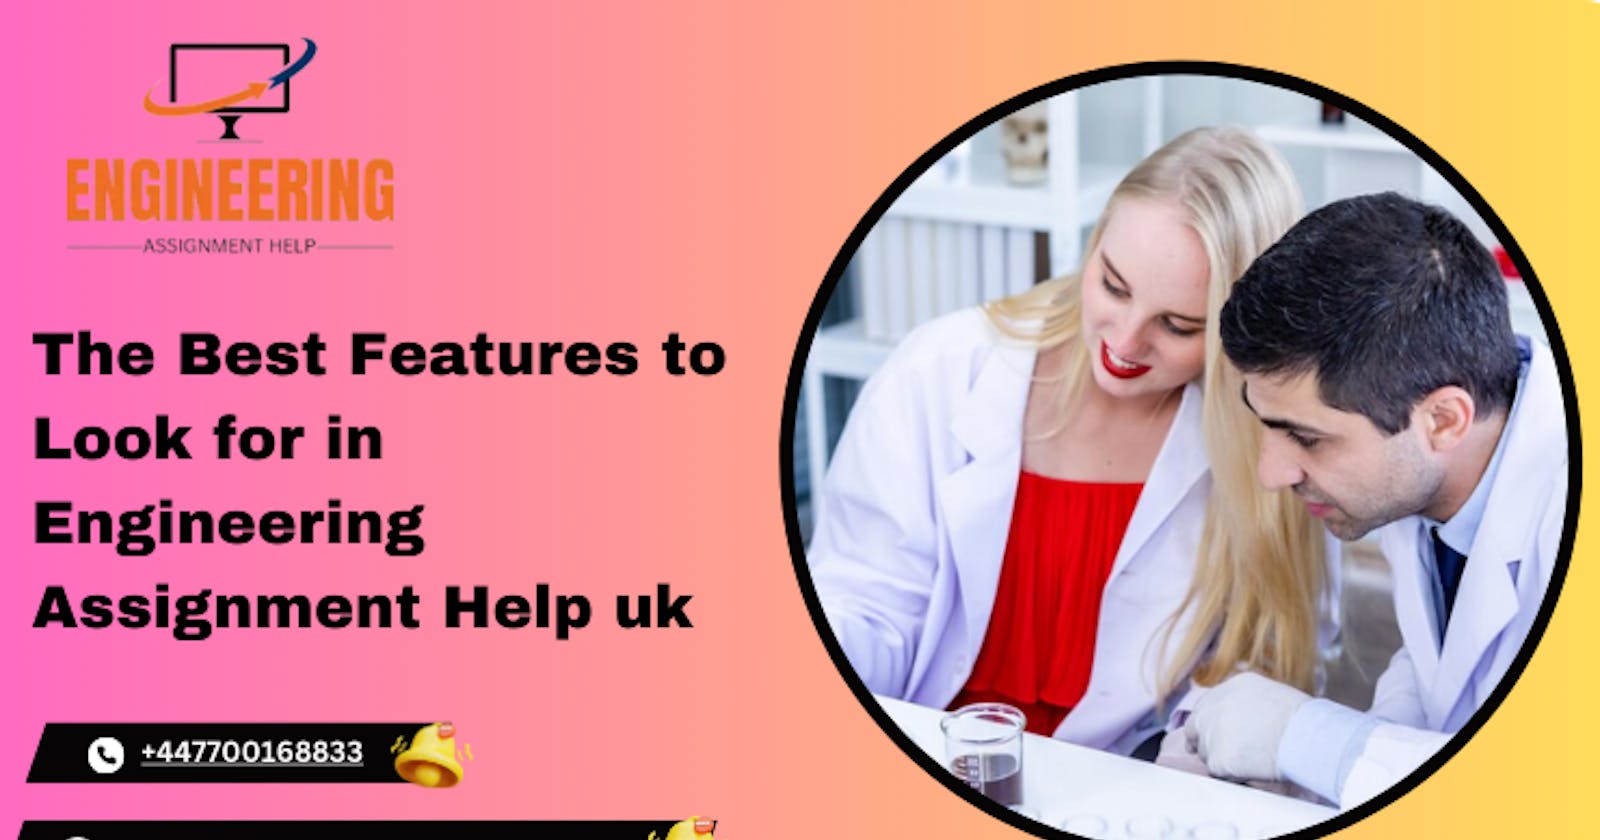 The Best Features to Look for in Engineering Assignment Help uk